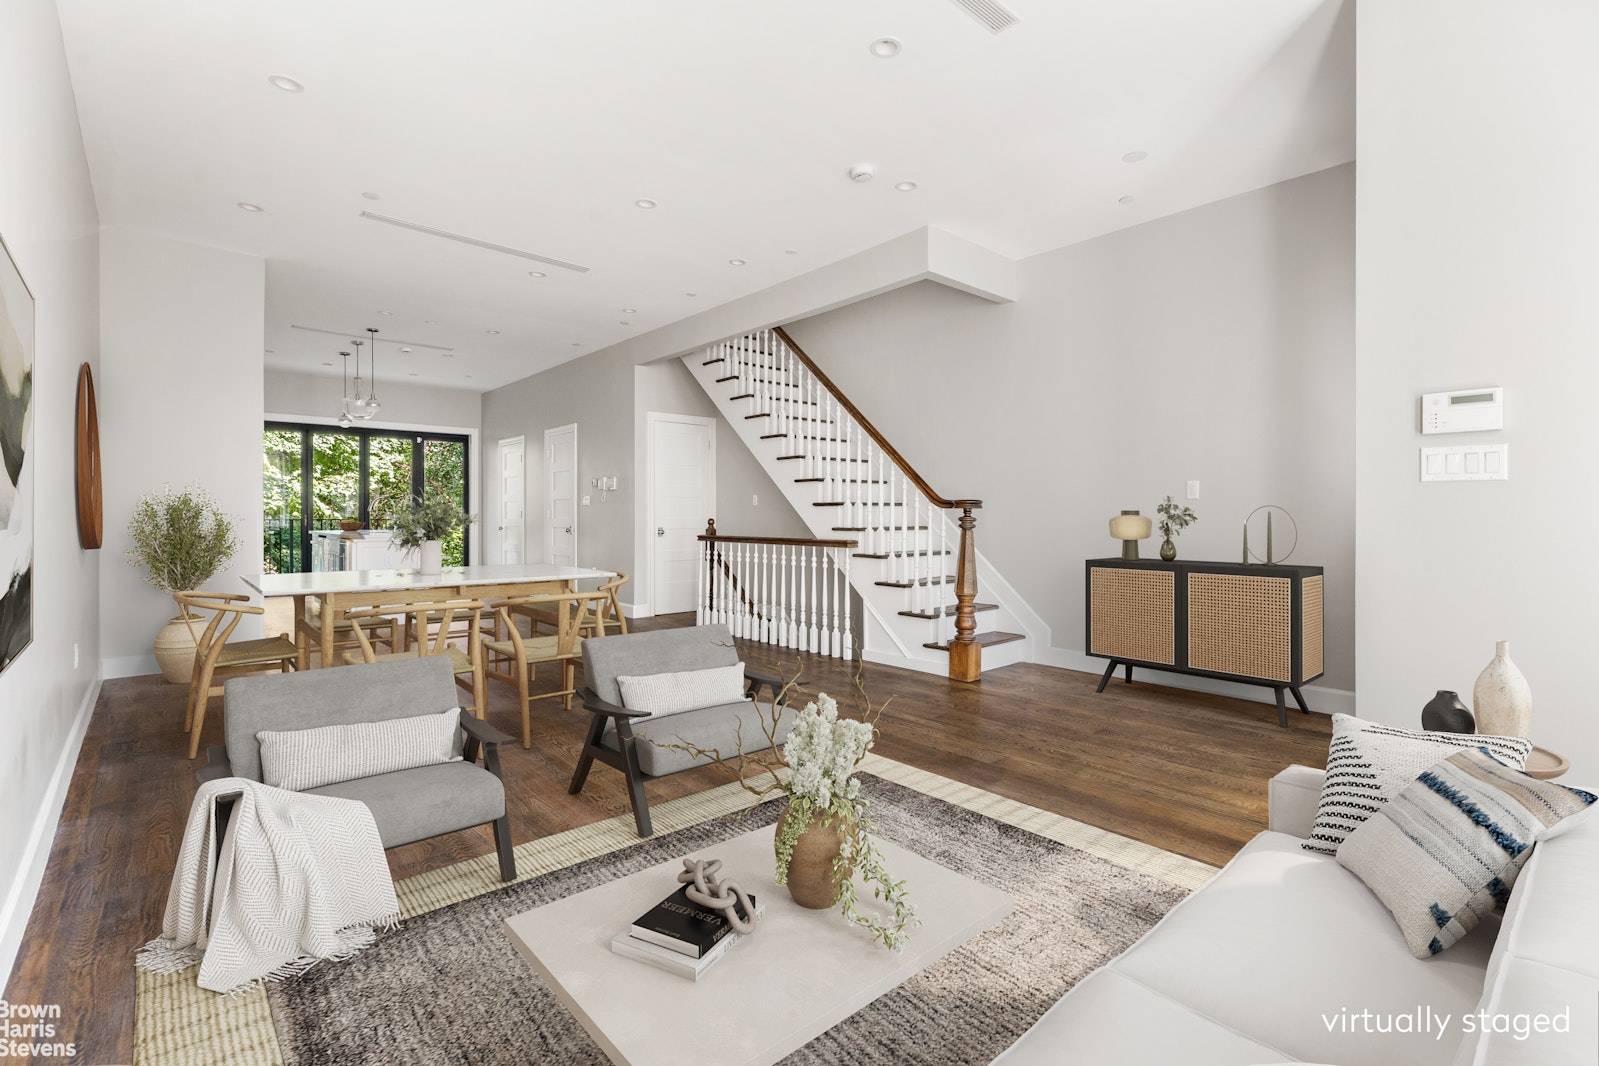 Welcome to 109 Halsey Street, a stunning luxury single family home located in prime Bedford Stuyvesant.